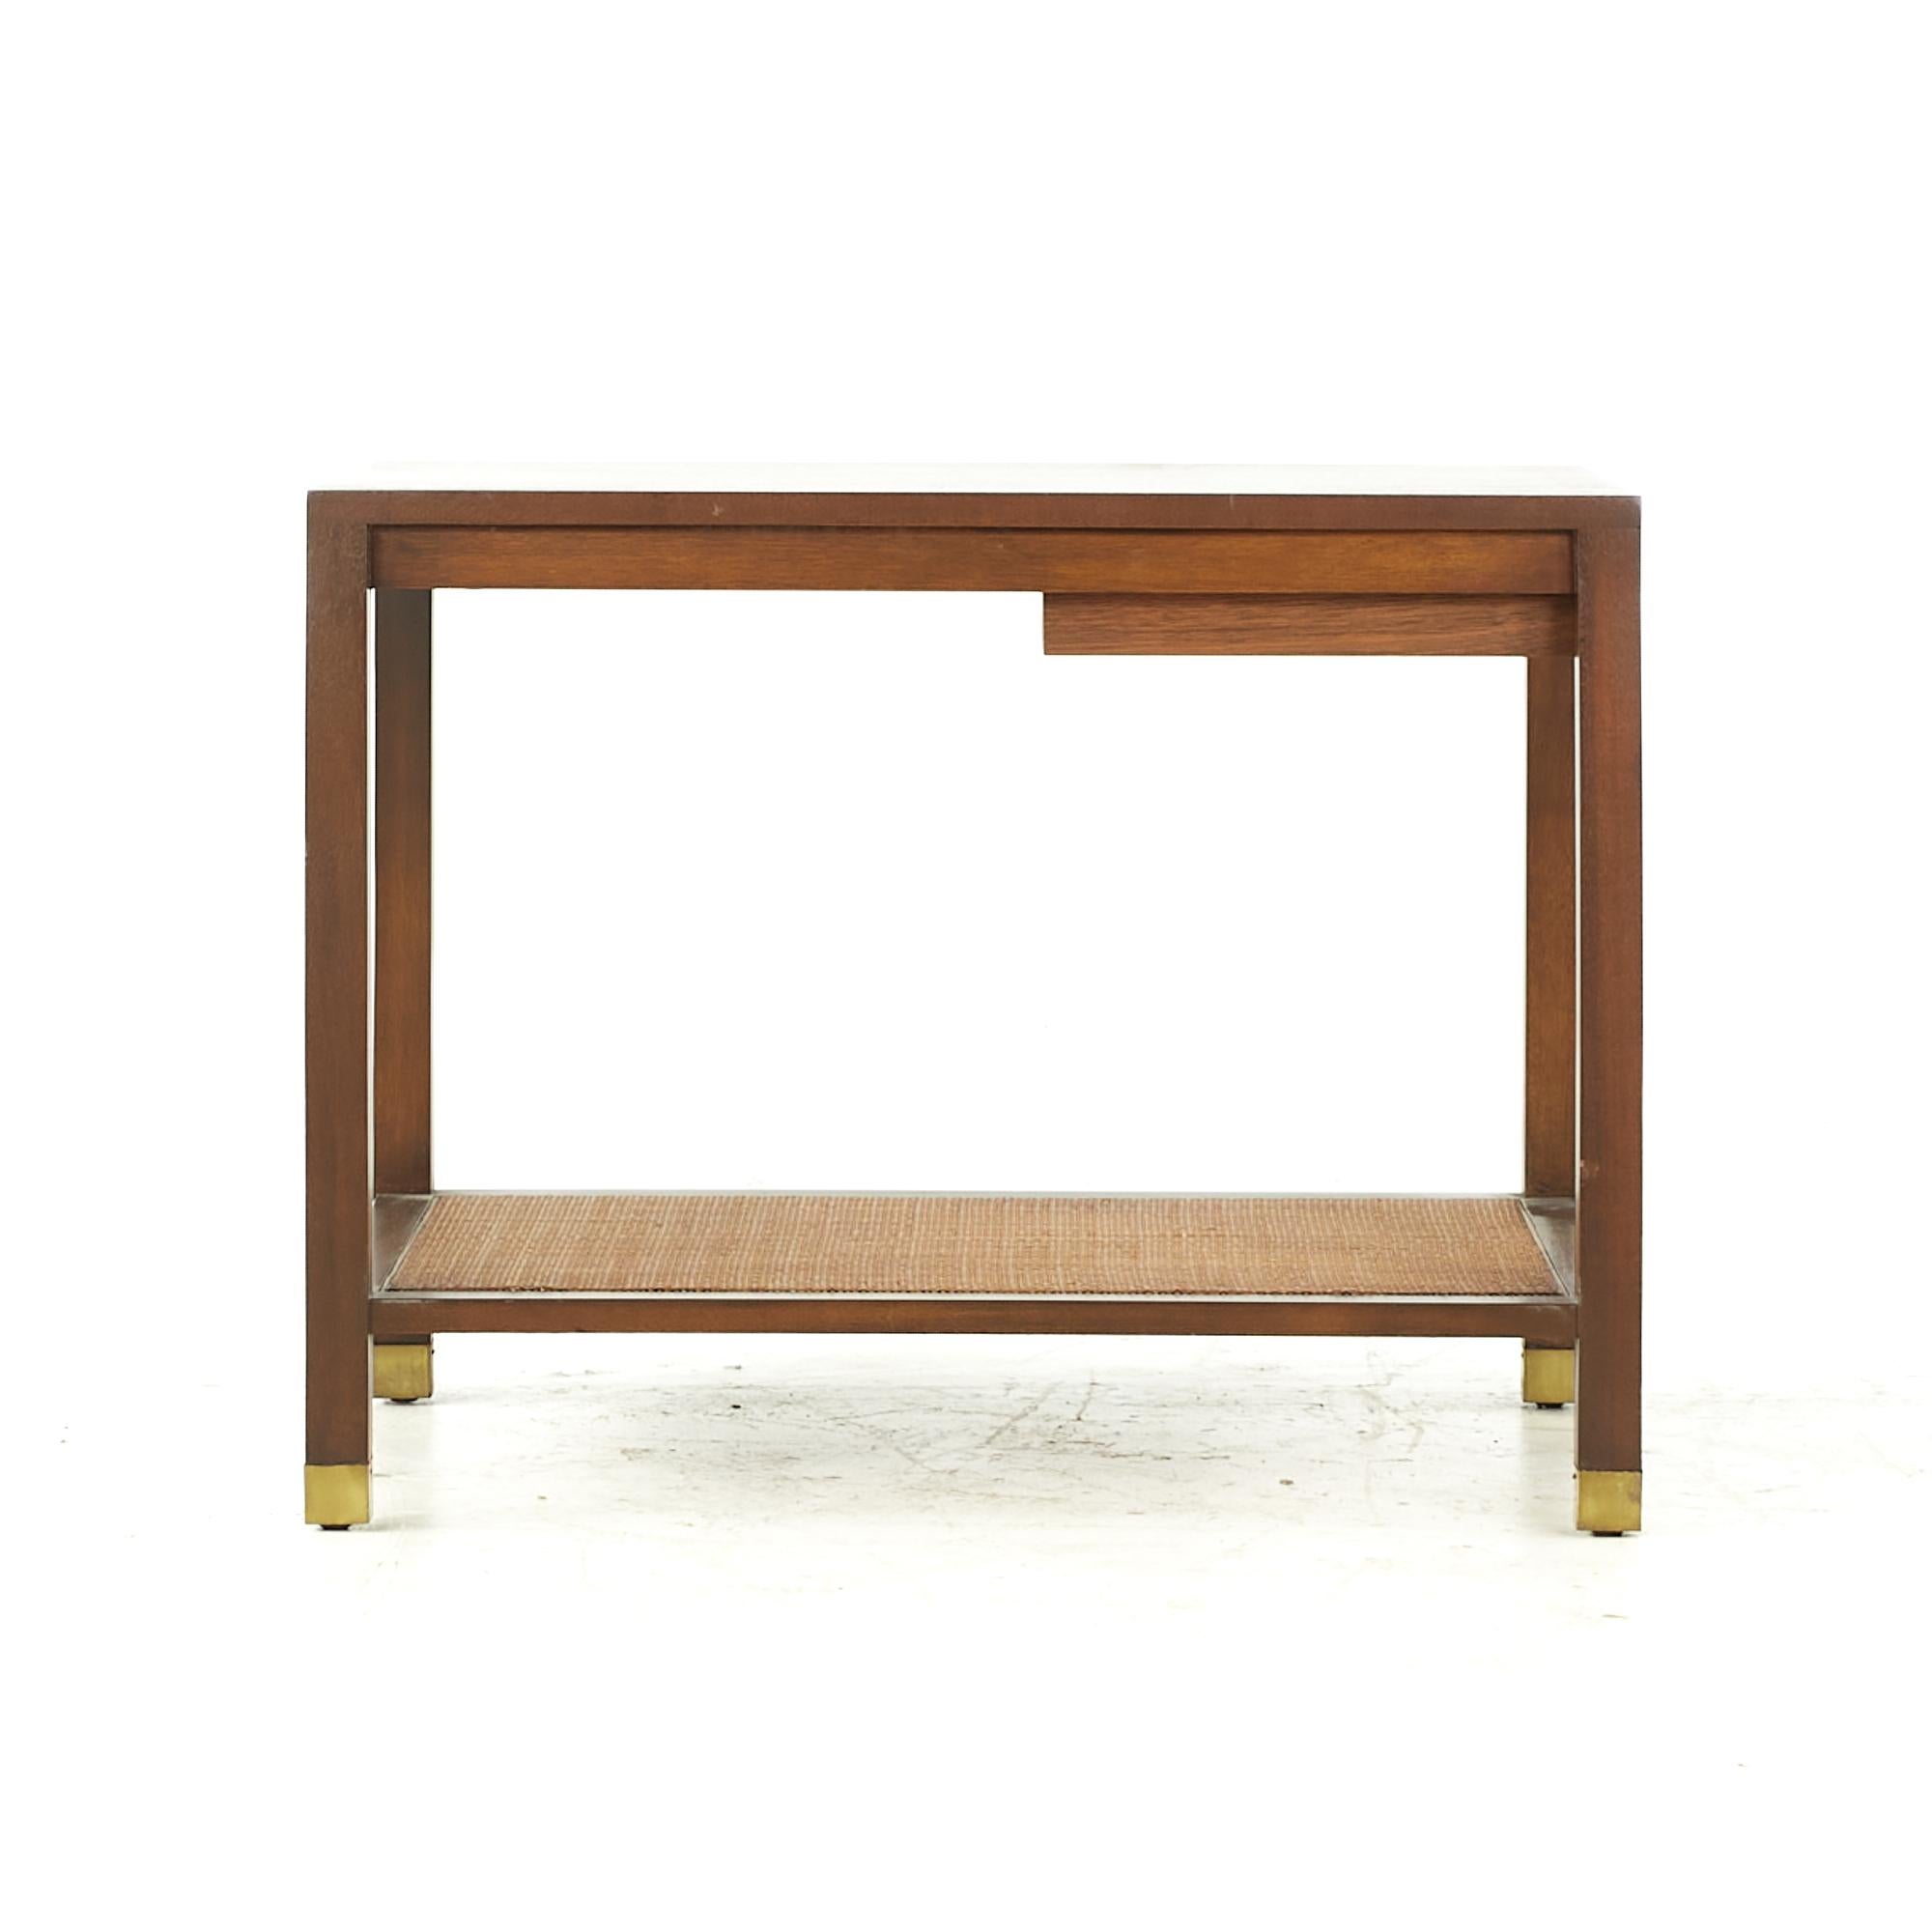 Harvey Probber midcentury Bleached Mahogany Side Table

This side table measures: 20.75 wide x 28 deep x 22 inches high

All pieces of furniture can be had in what we call restored vintage condition. That means the piece is restored upon